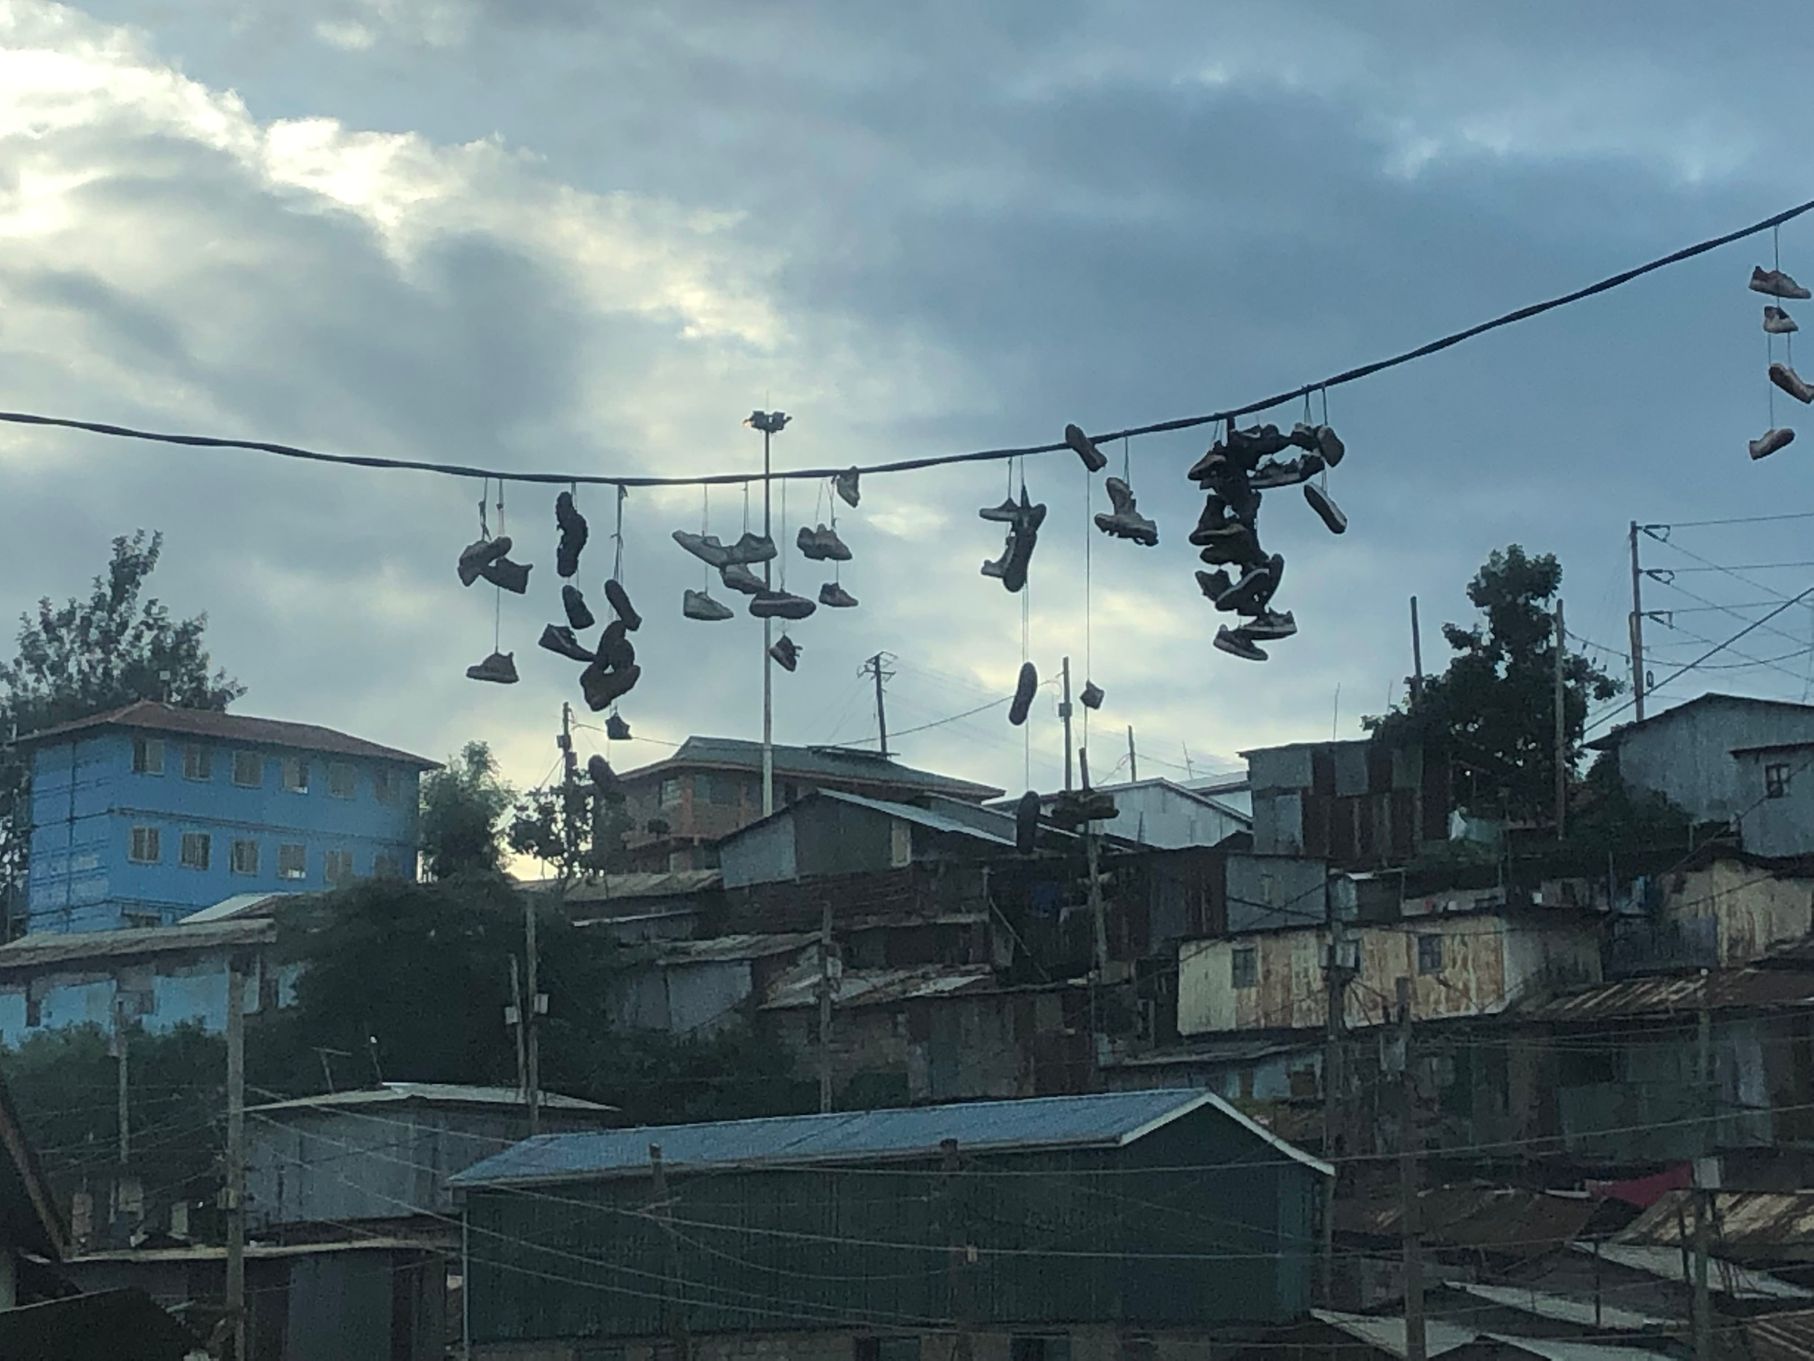 shoes hanging from electrict wires.